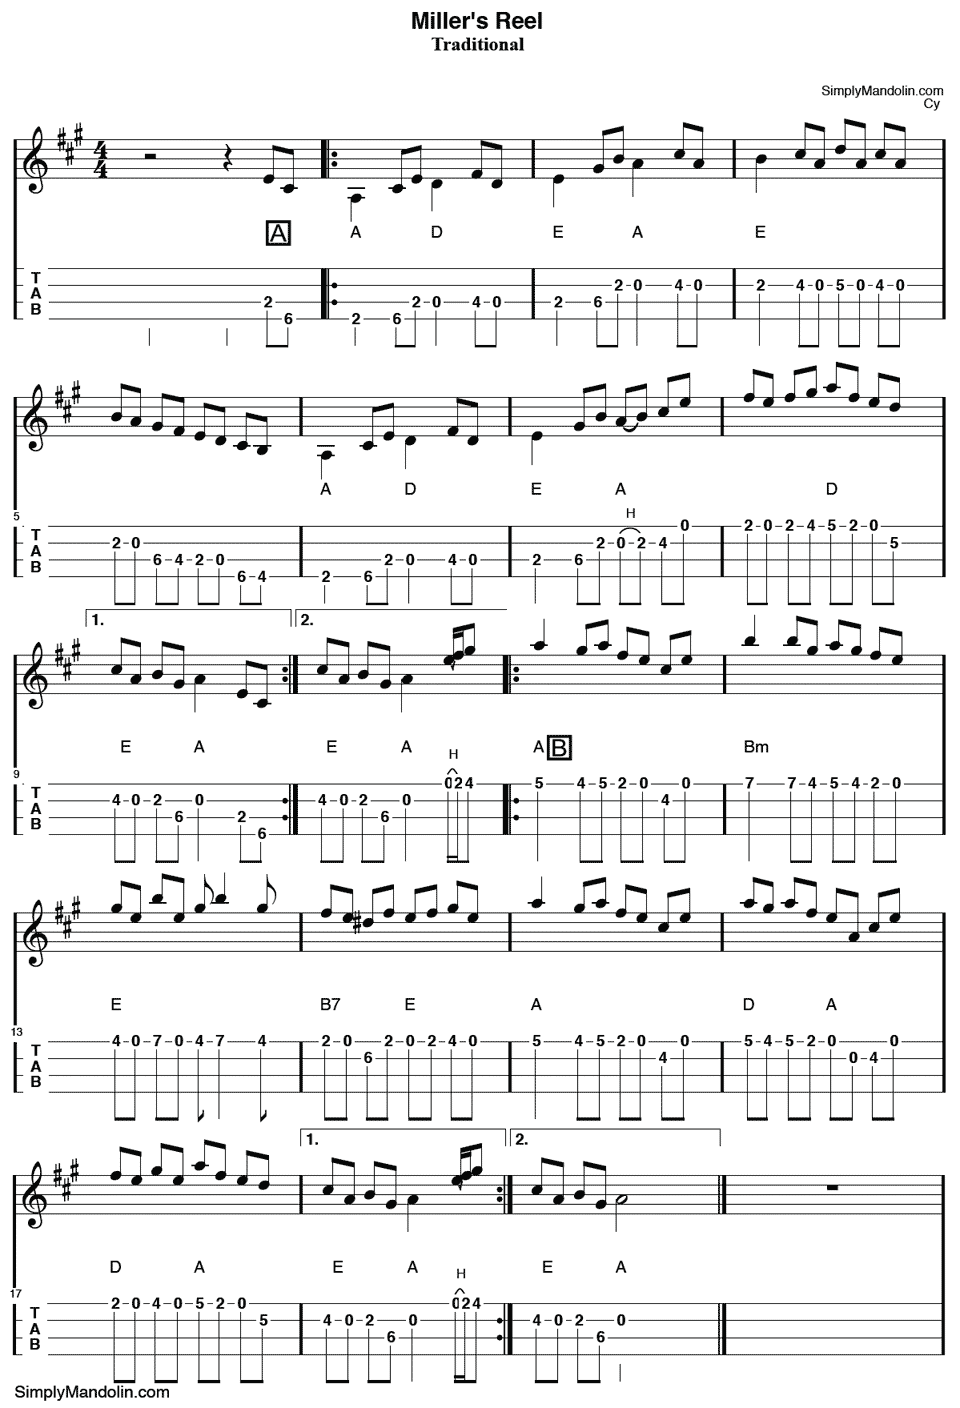 An image of music and tab for the traditional tune "Miller's Reel".